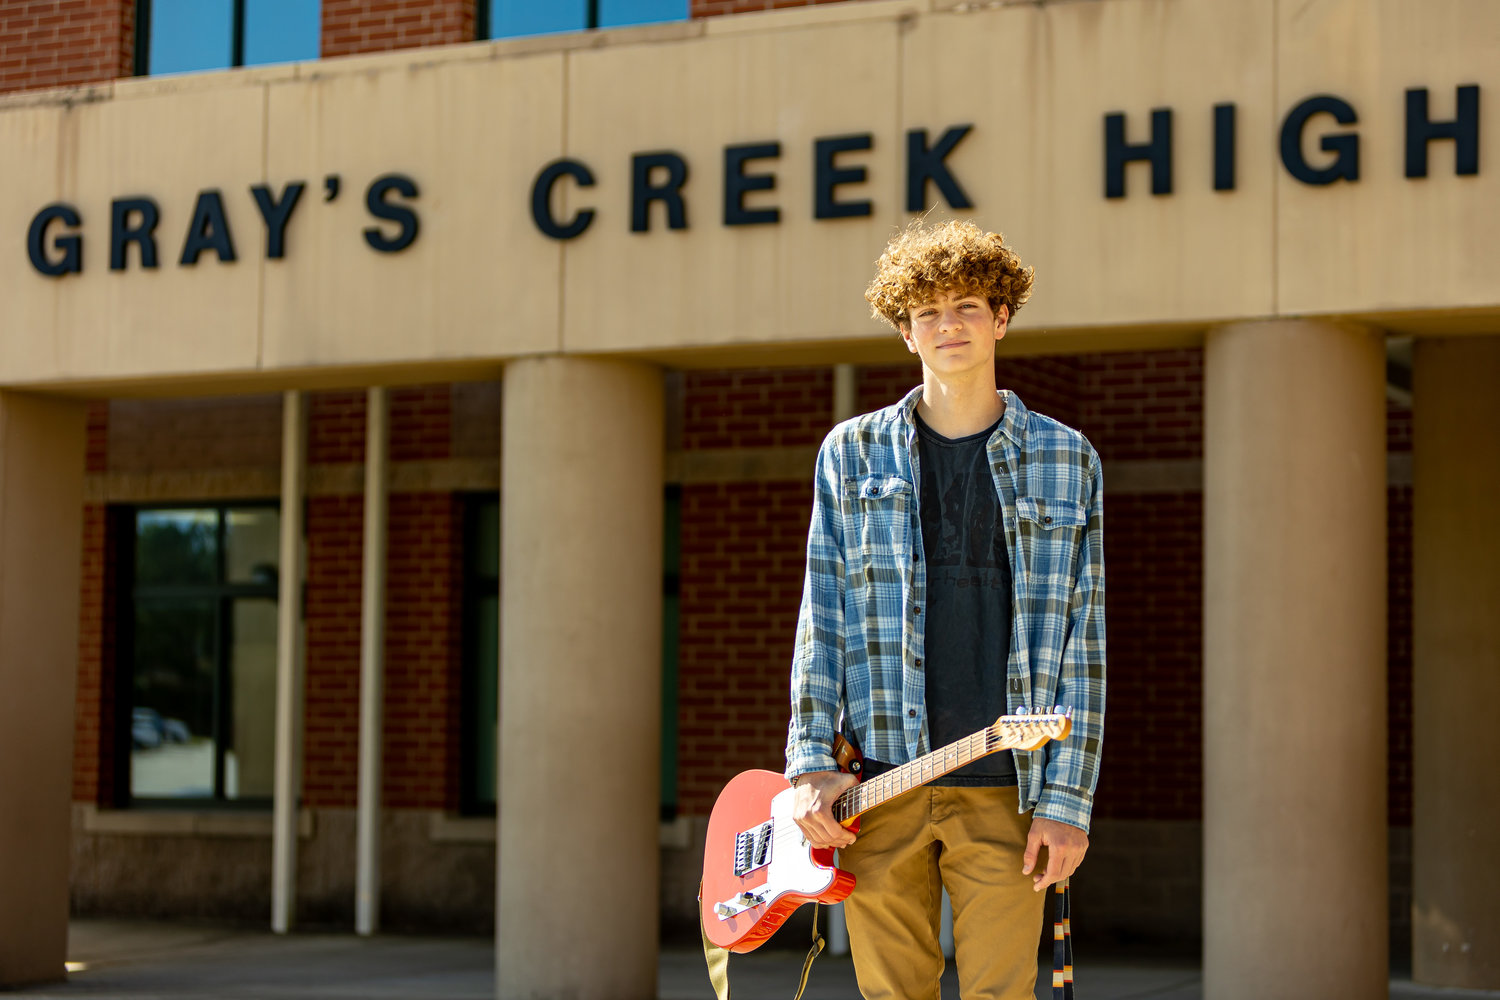 Forsby Quick will graduate from Gray's Creek High School and pursue a music degree at Western Carolina University.